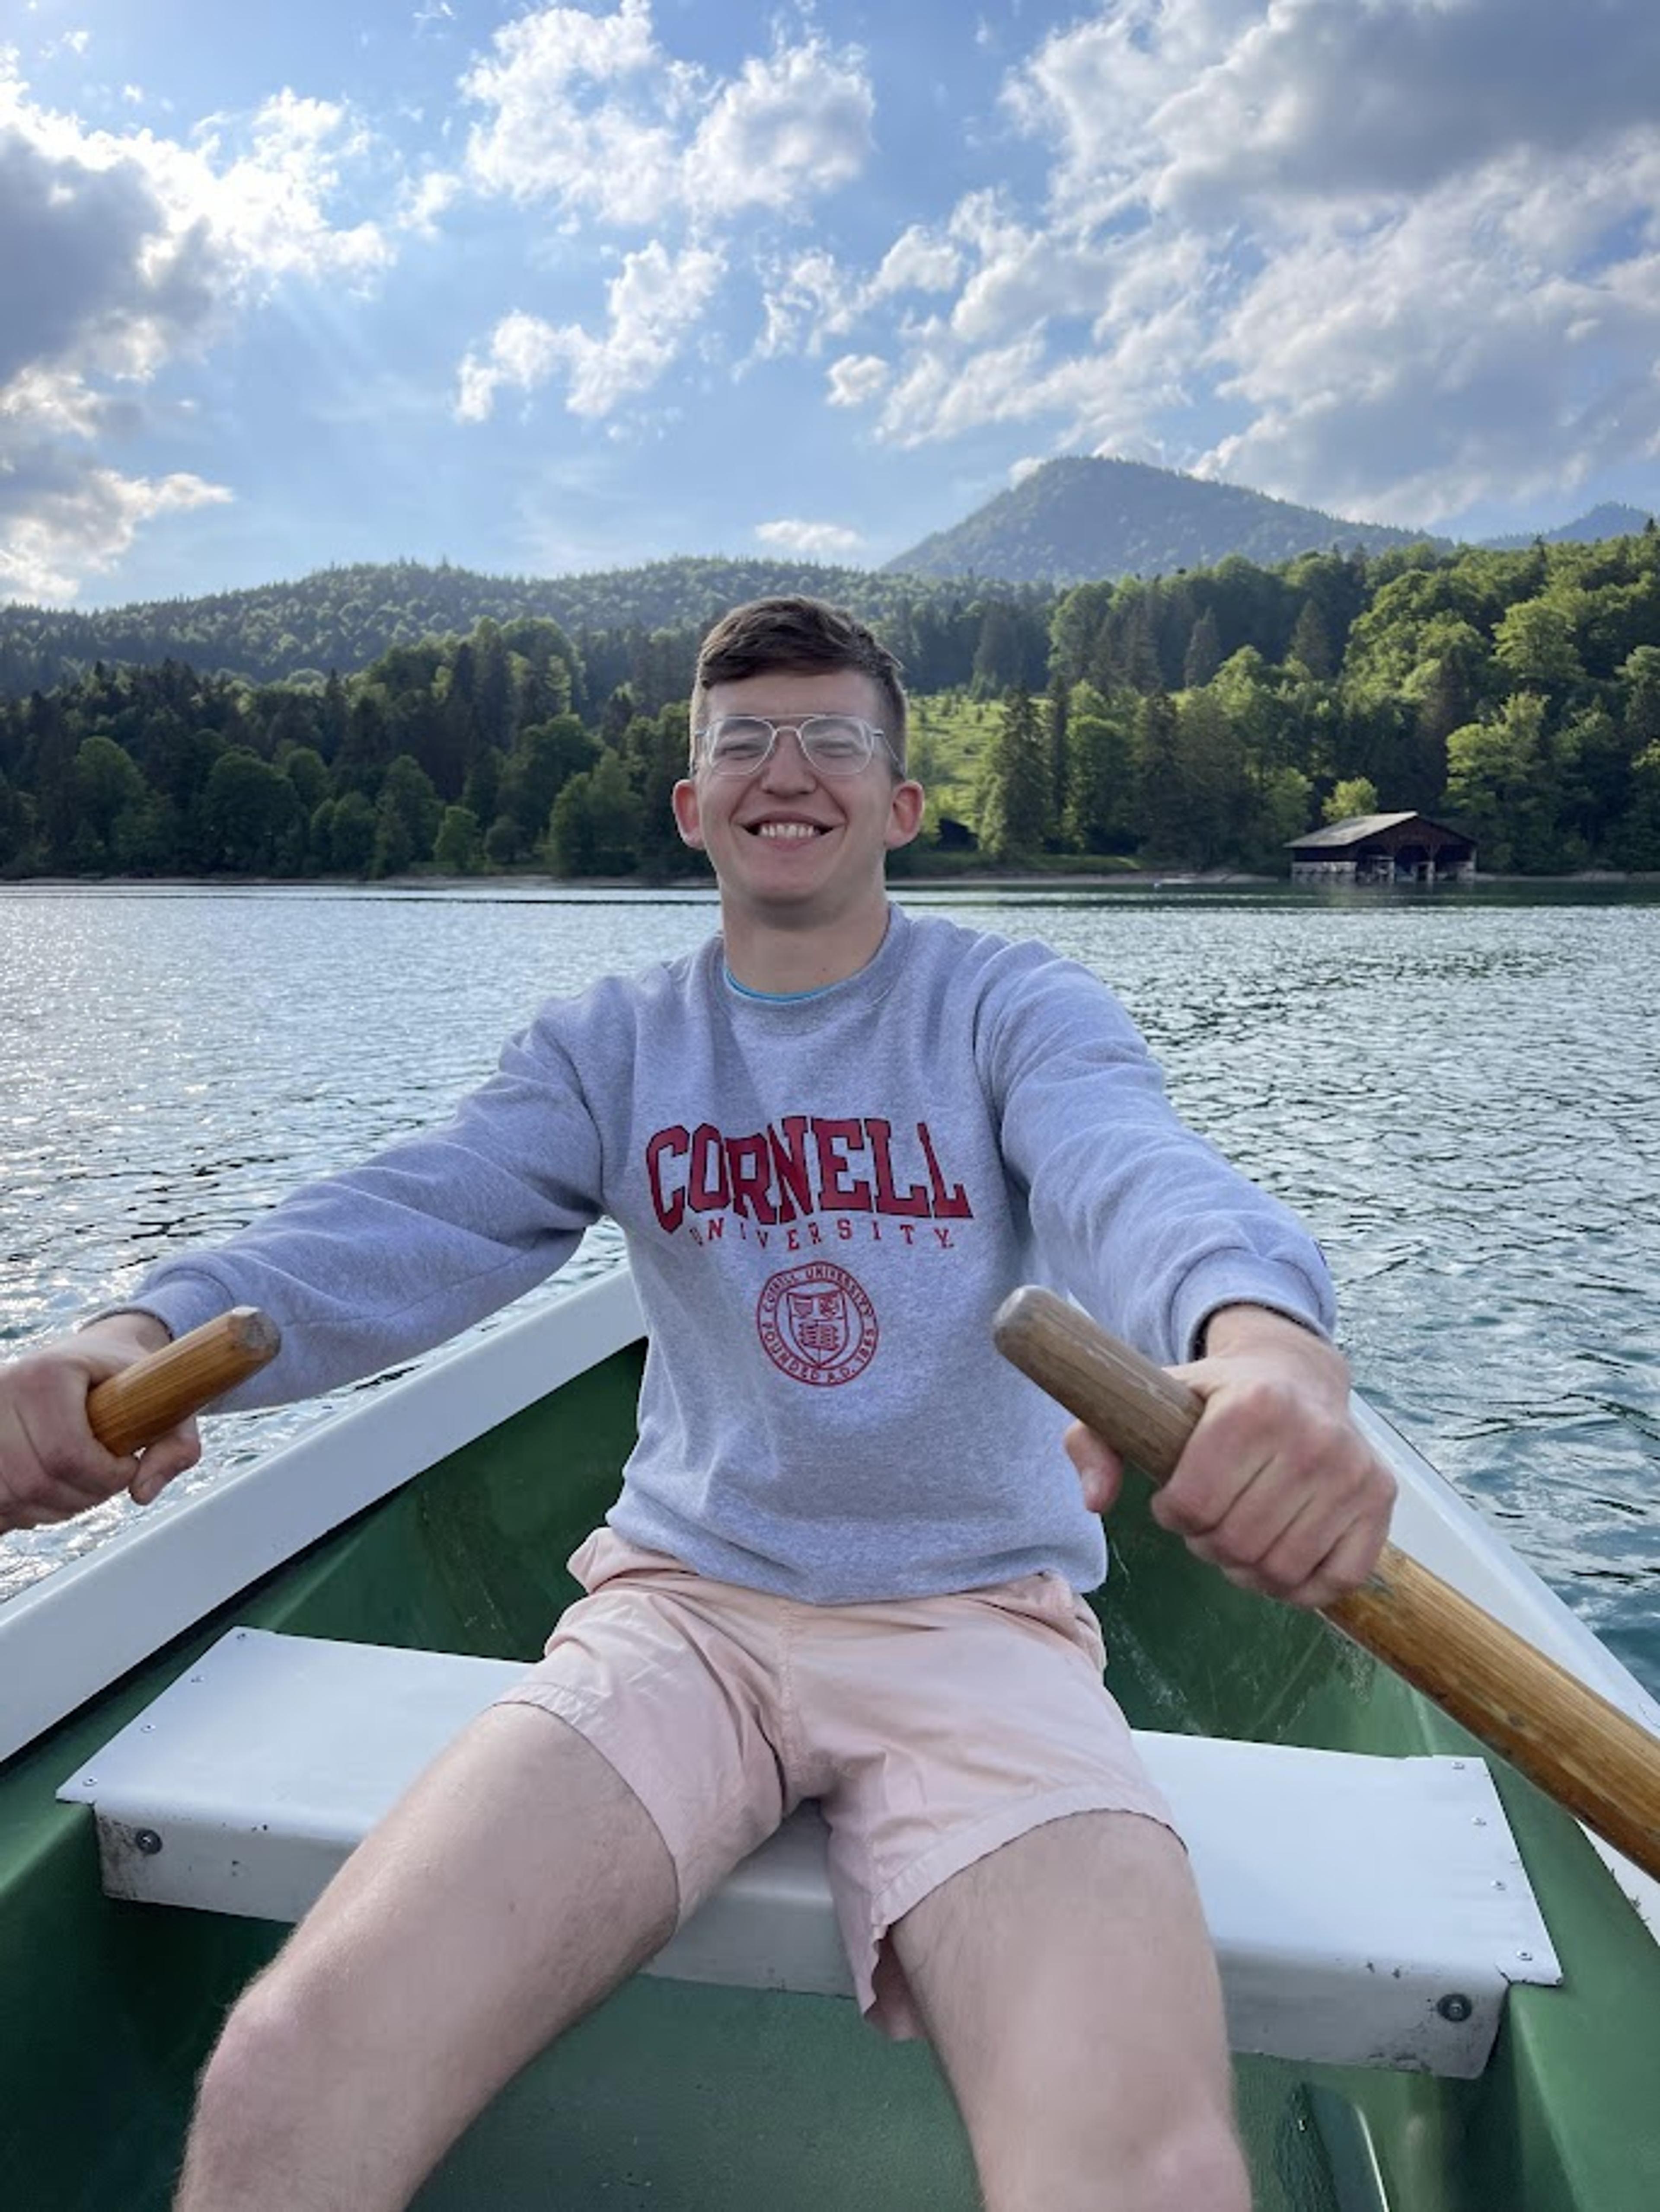 A young man smiling at the camera, rowing a boat on a lake